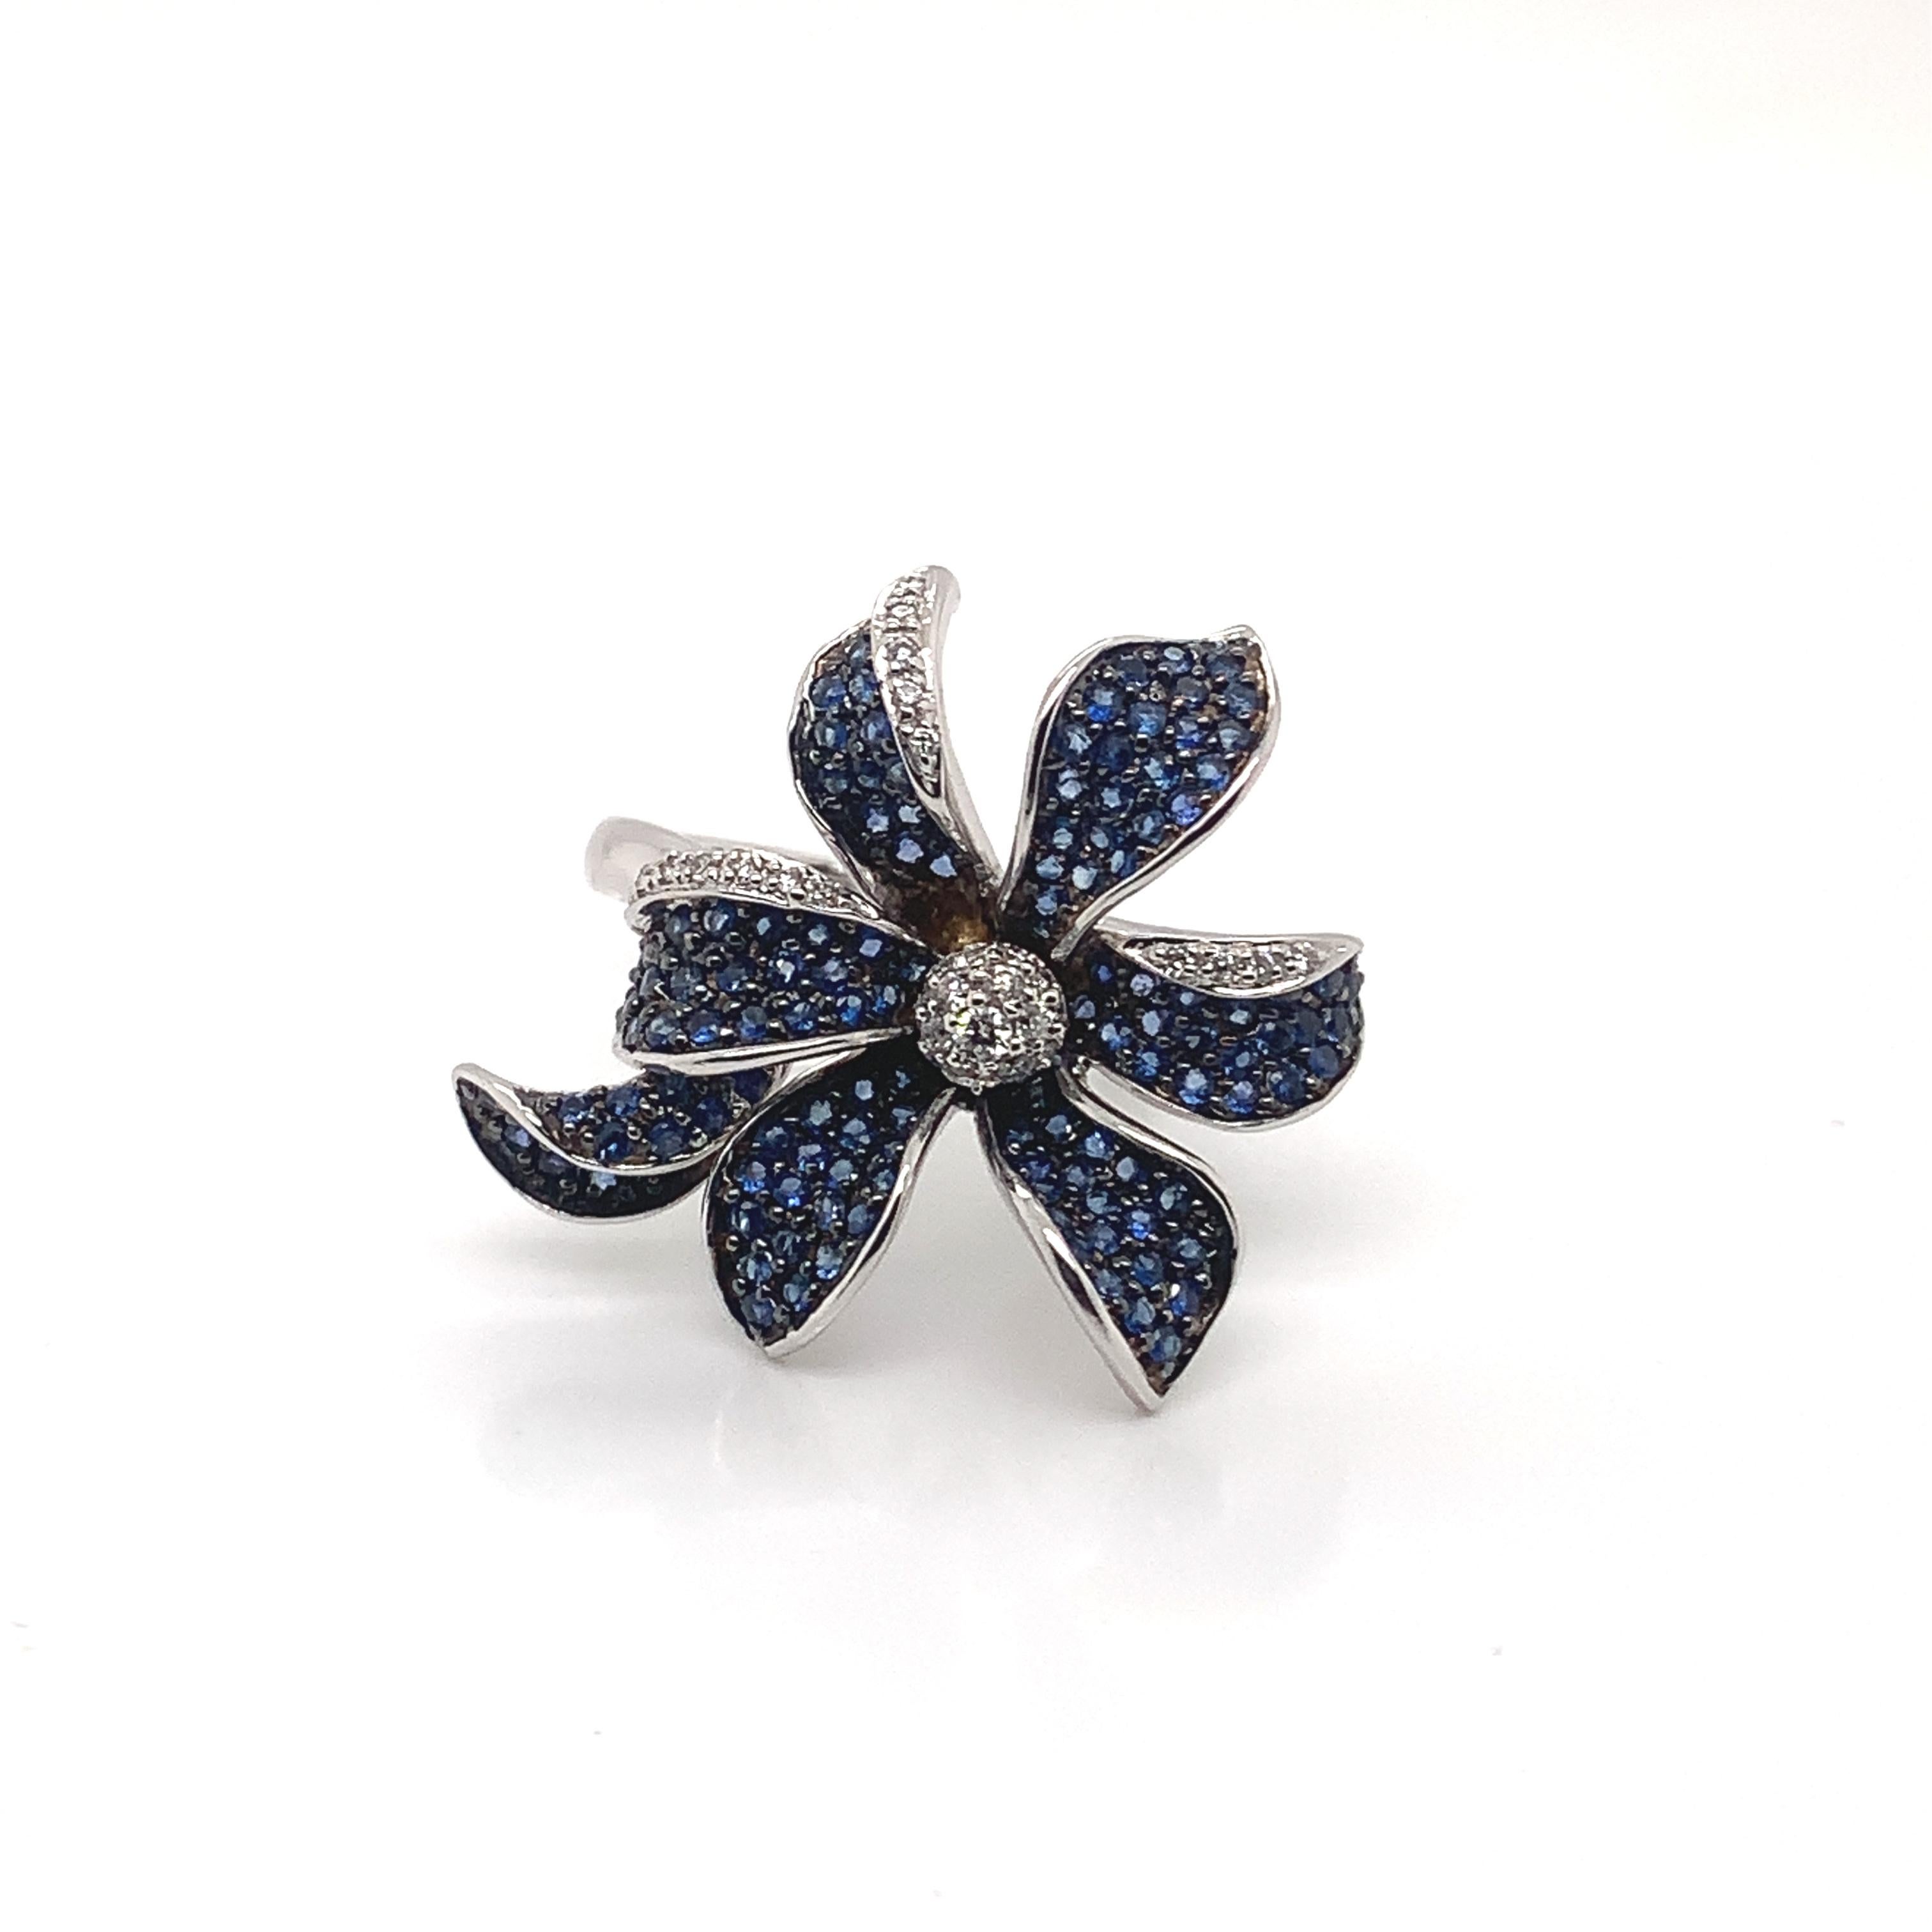 Round Cut Floral 1.7 Carat Blue Sapphire and Diamond Ring in 14 Karat White Gold